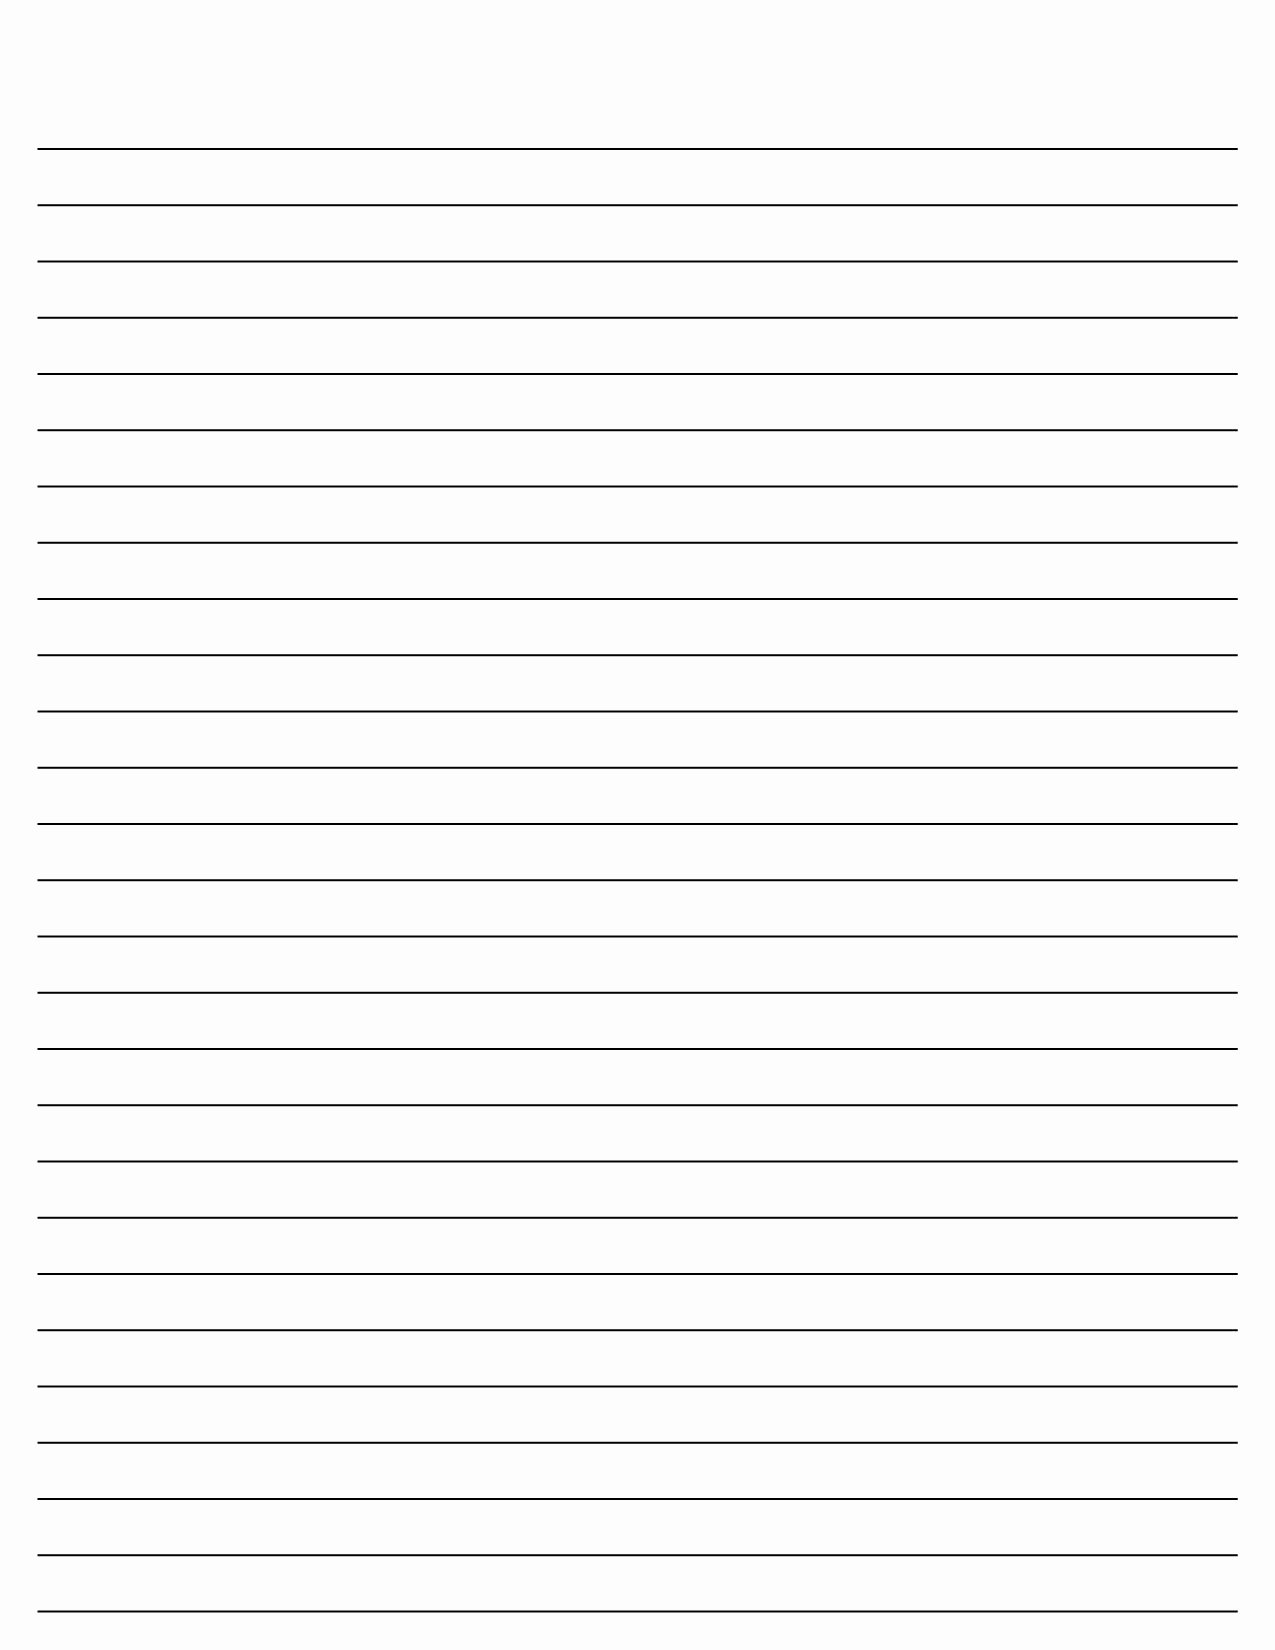 Picture Of Lined Paper Lovely Printable Lined Paper Search Results Landscaping